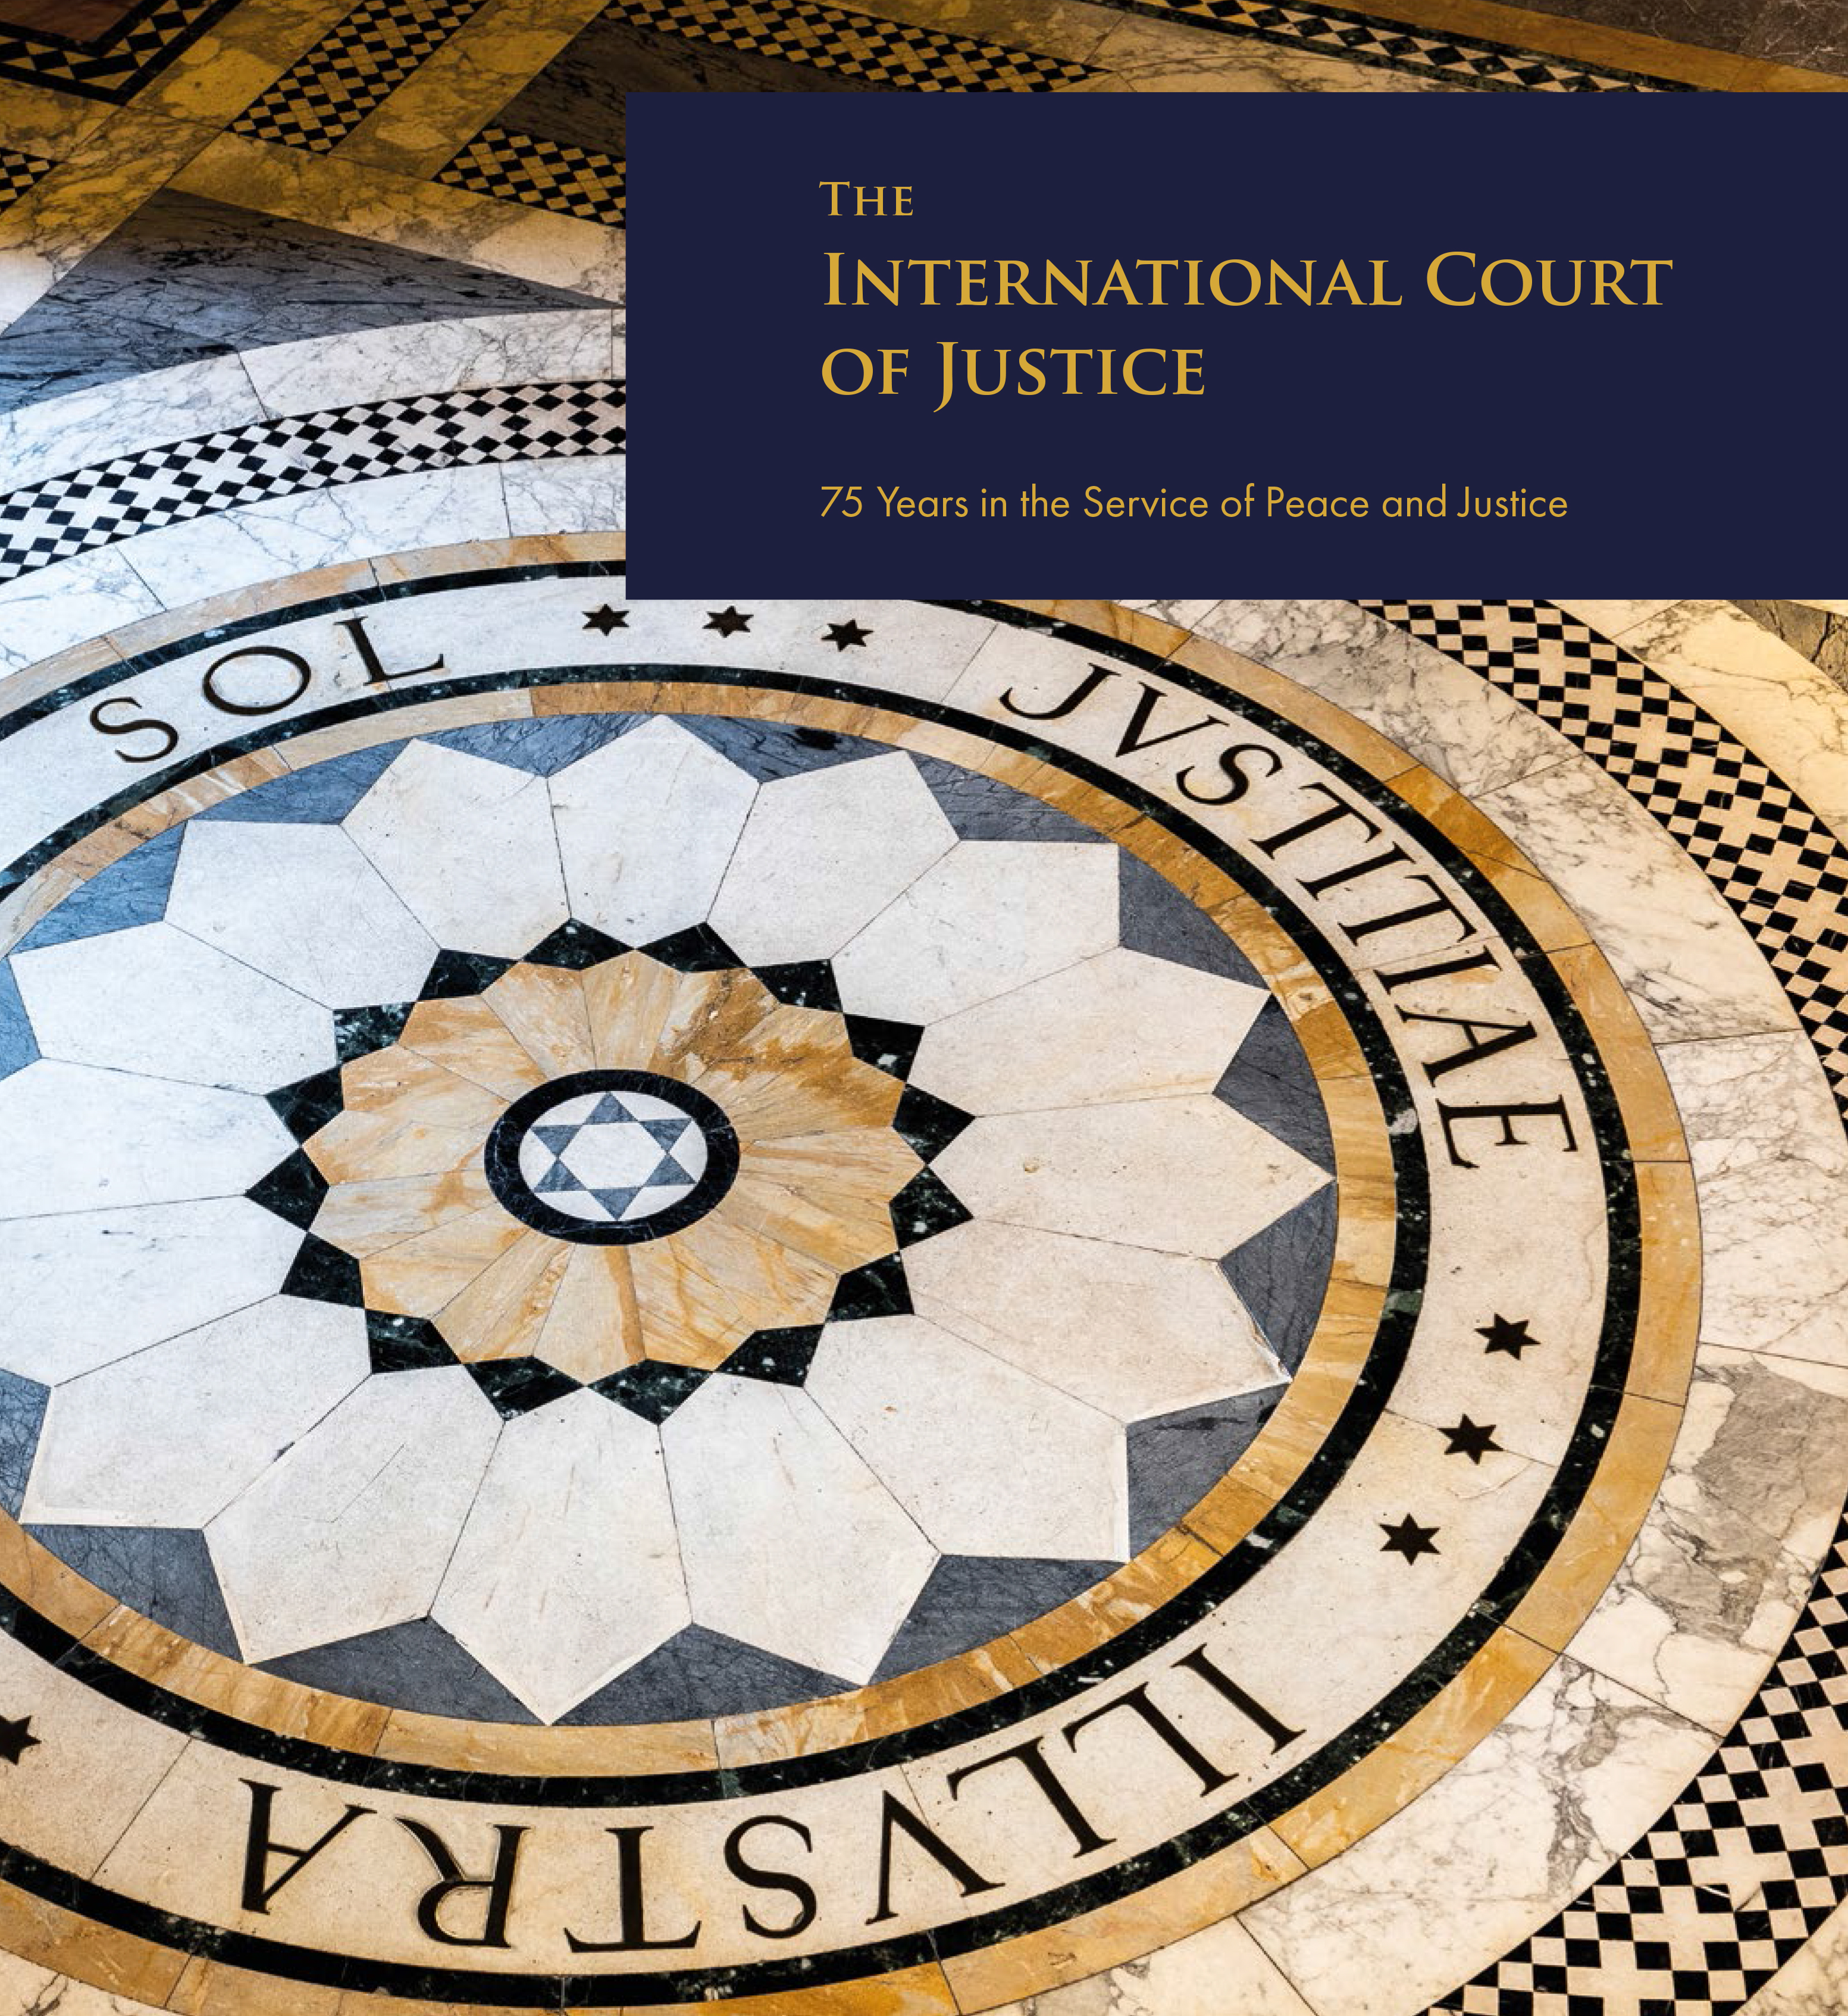 The International Court of Justice: 75 Years in the Service of Peace and Justice